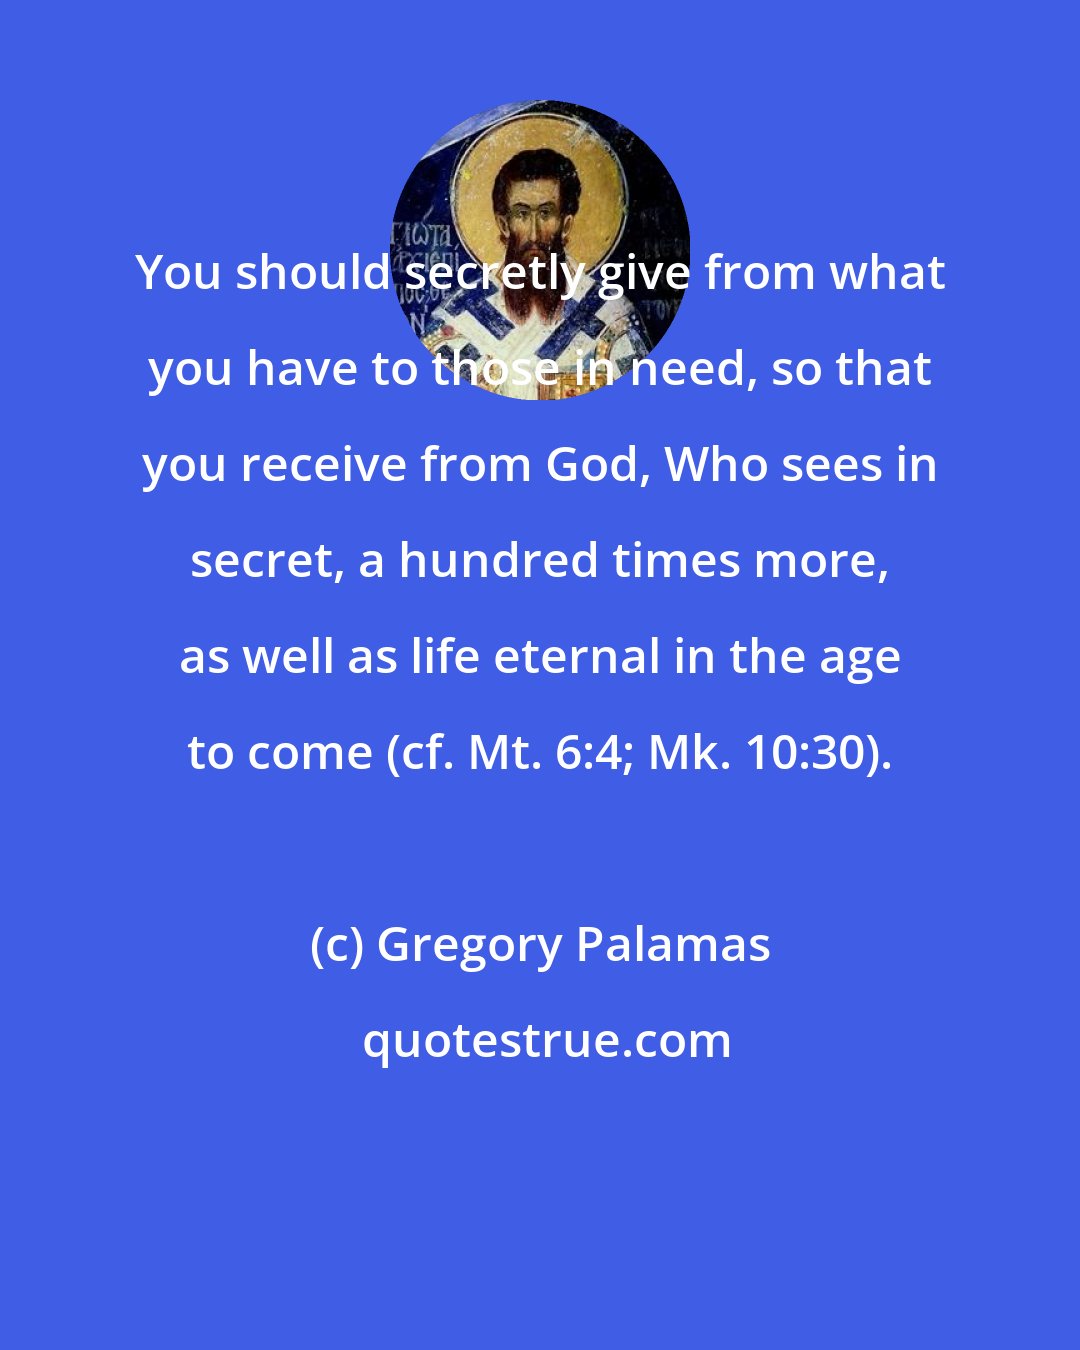 Gregory Palamas: You should secretly give from what you have to those in need, so that you receive from God, Who sees in secret, a hundred times more, as well as life eternal in the age to come (cf. Mt. 6:4; Mk. 10:30).